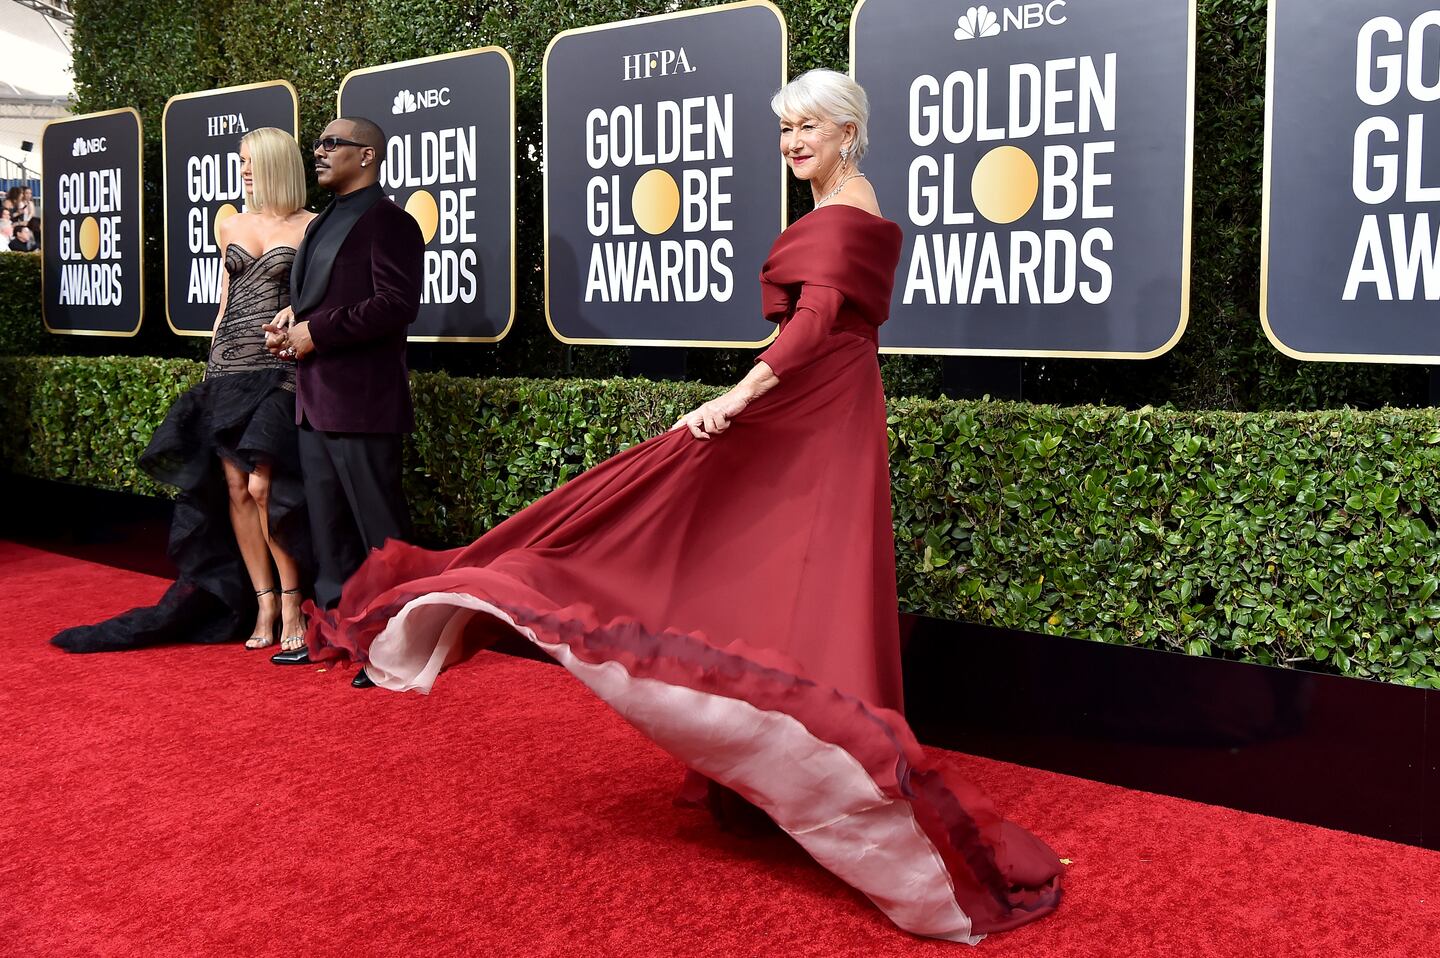 The Golden Globes will be held virtually this year, depriving luxury brands of a key marketing opportunity.